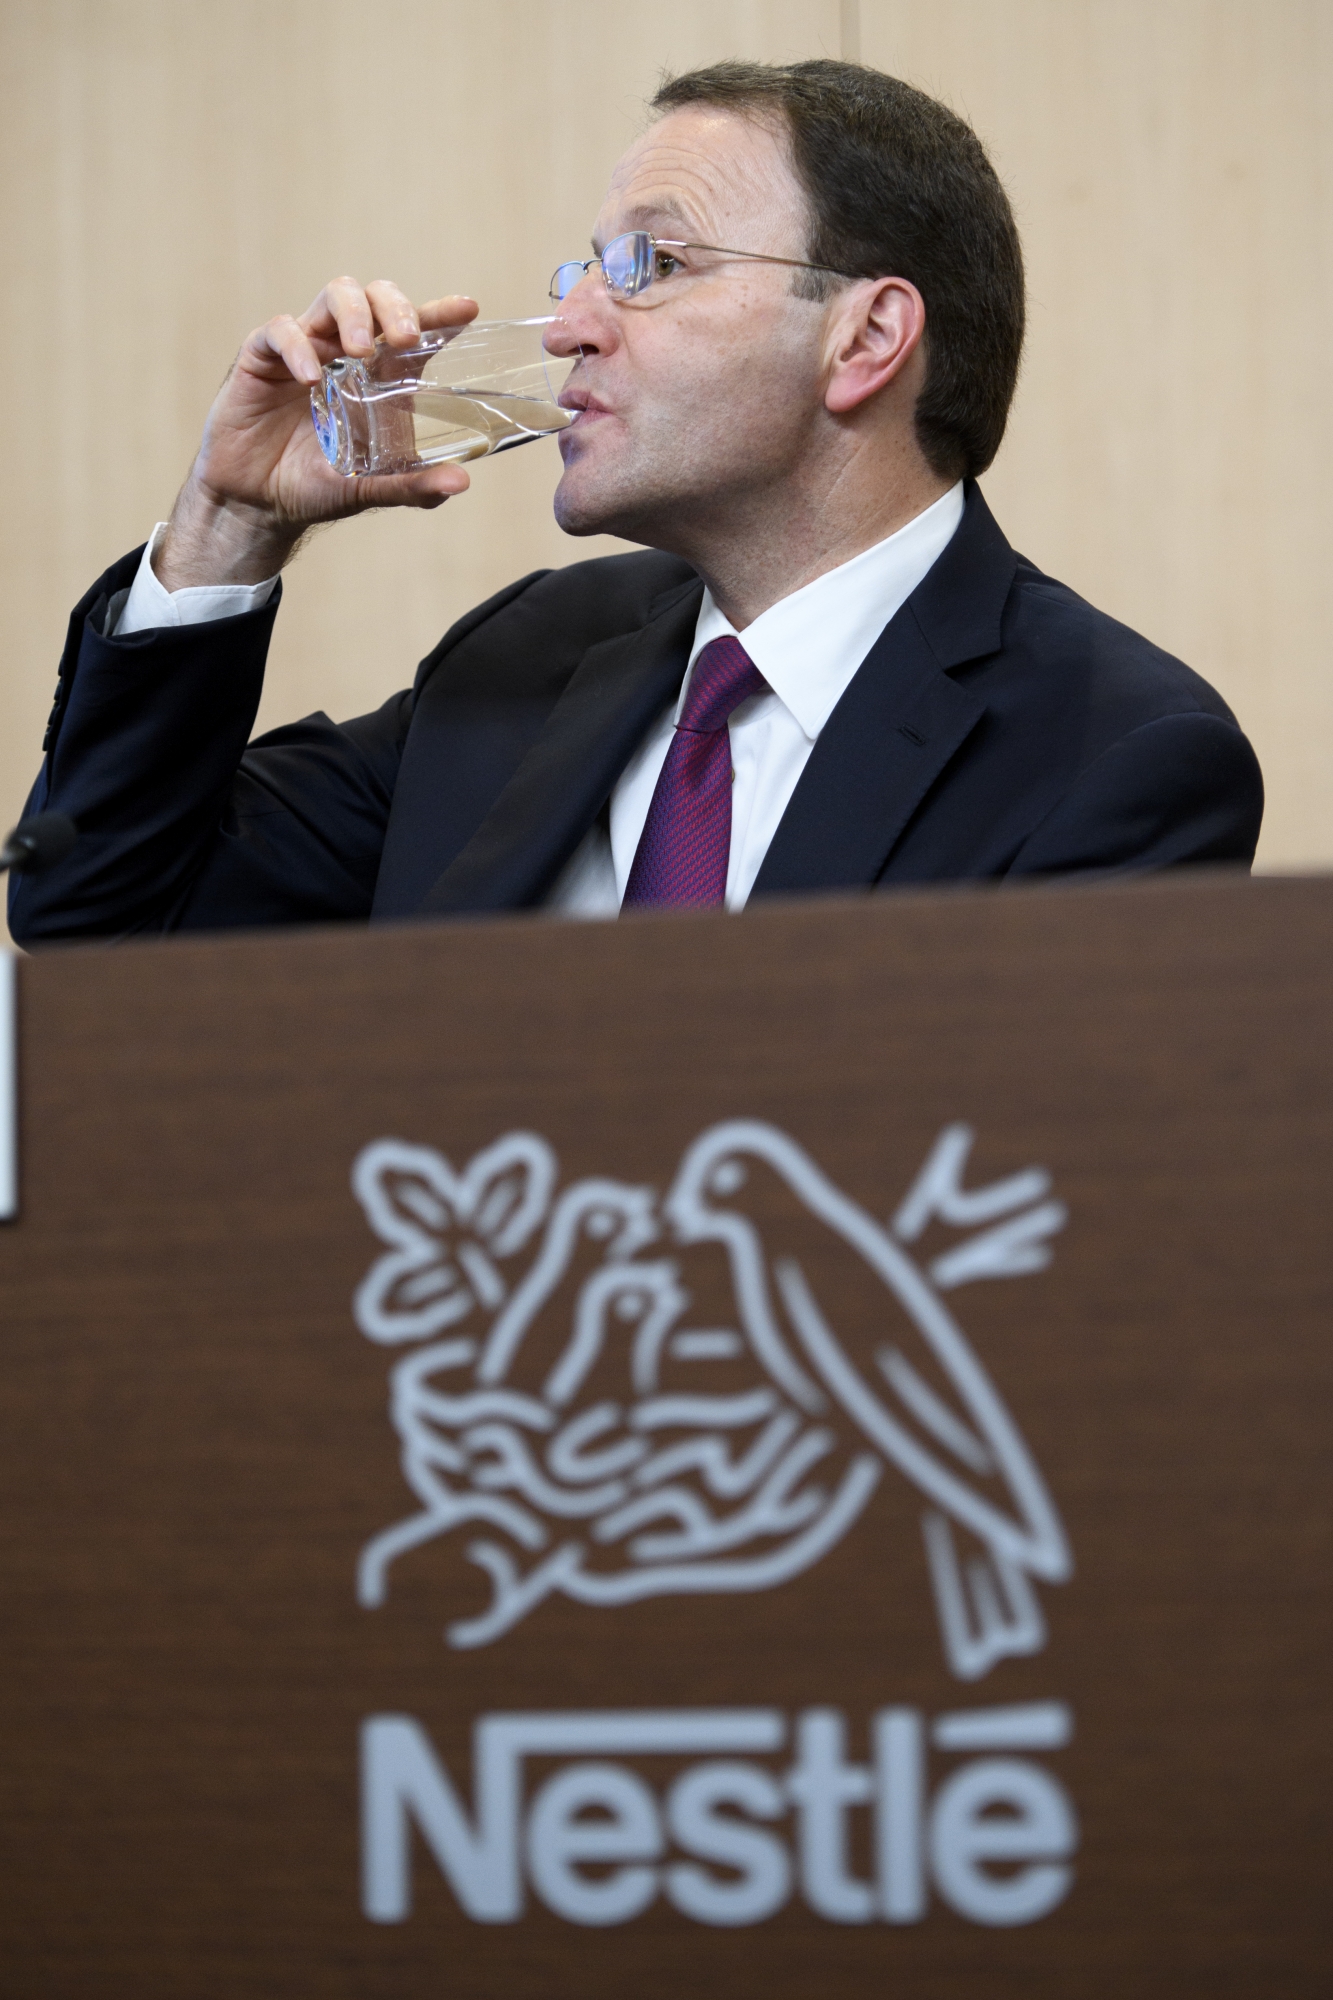 Nestle's new CEO Ulf Mark Schneider drinks a glas of water during the 2016 full-year results press conference of the food and drinks giant Nestle in Vevey, Switzerland, Thursday, February 16, 2017. Nestle SA, the world's biggest food and drinks producer, fiscal 2016 profit declined to 8.53 billion Swiss francs for 2016. (KEYSTONE/Laurent Gillieron)